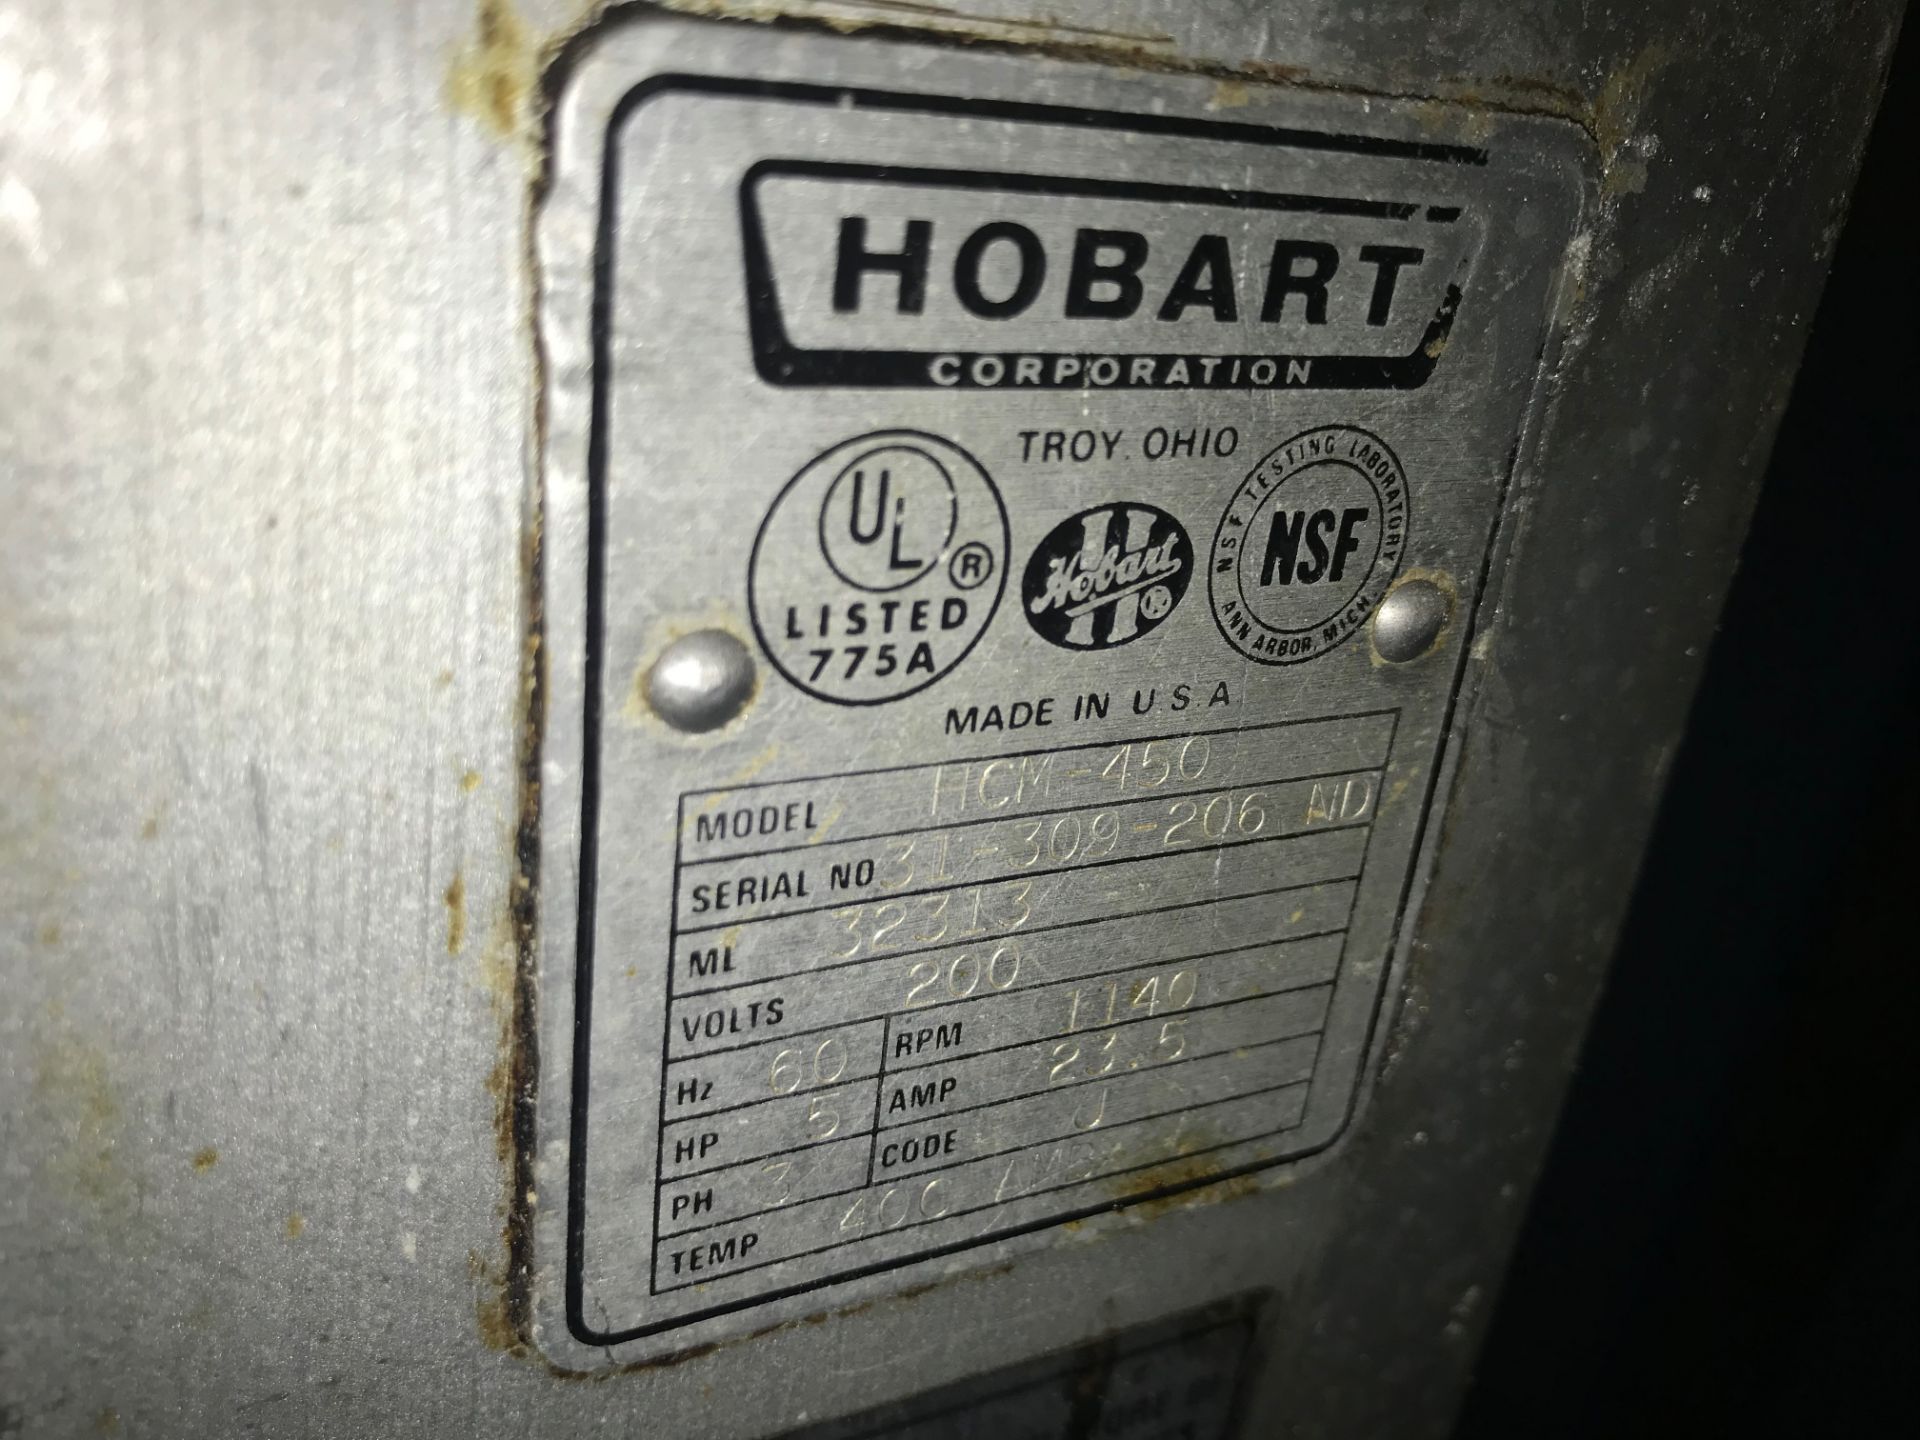 Hobart Cutter Mixer, Model# HCM-450, Serial# 31-309-206, 200 Volts, 60 Hz, 1140 RPM, 5 HP, 3 Phase - Image 3 of 4